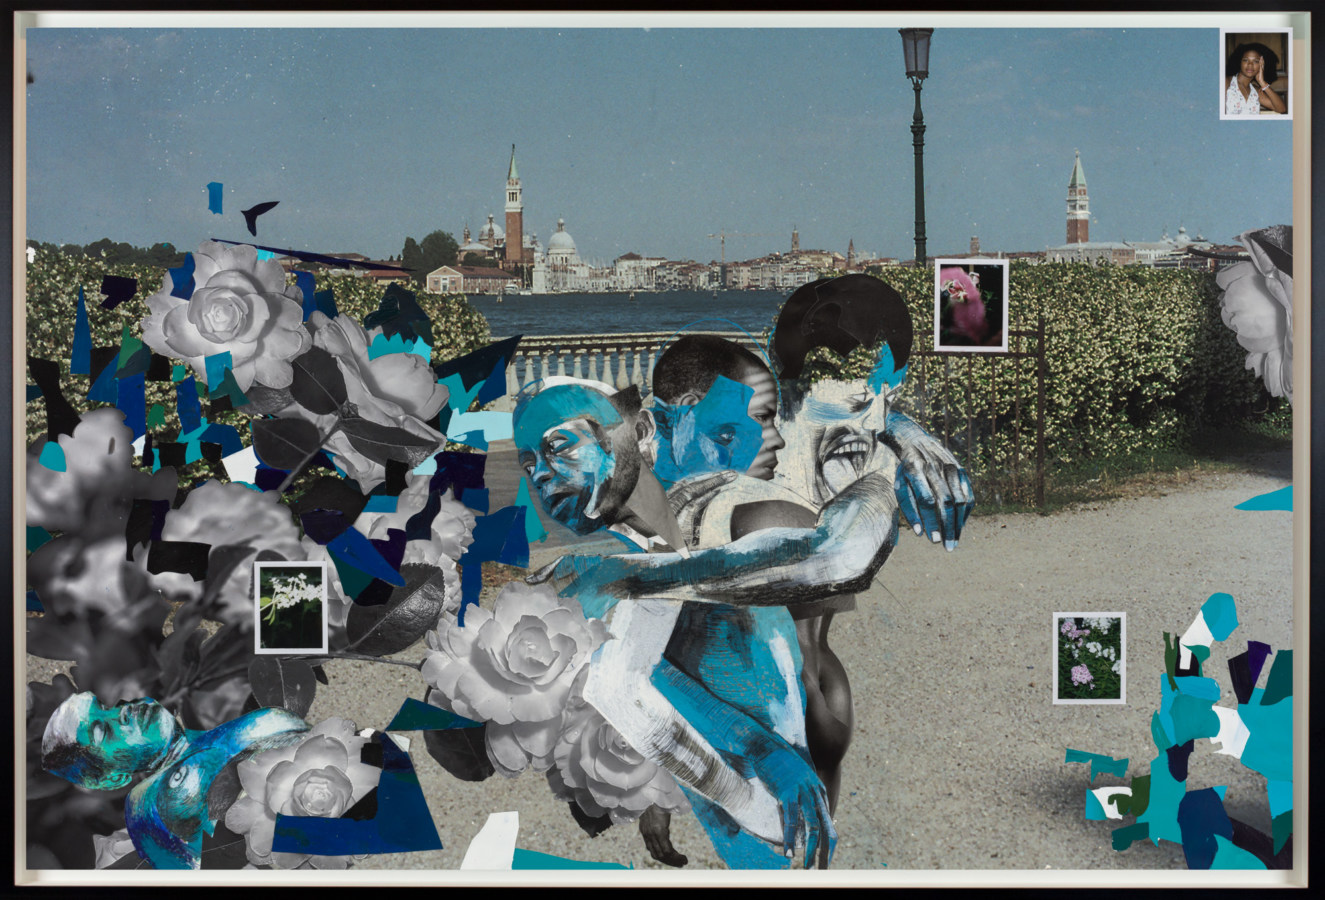 A collage of three figures embracing, surrounded by flowers. The background is an image of Venice.